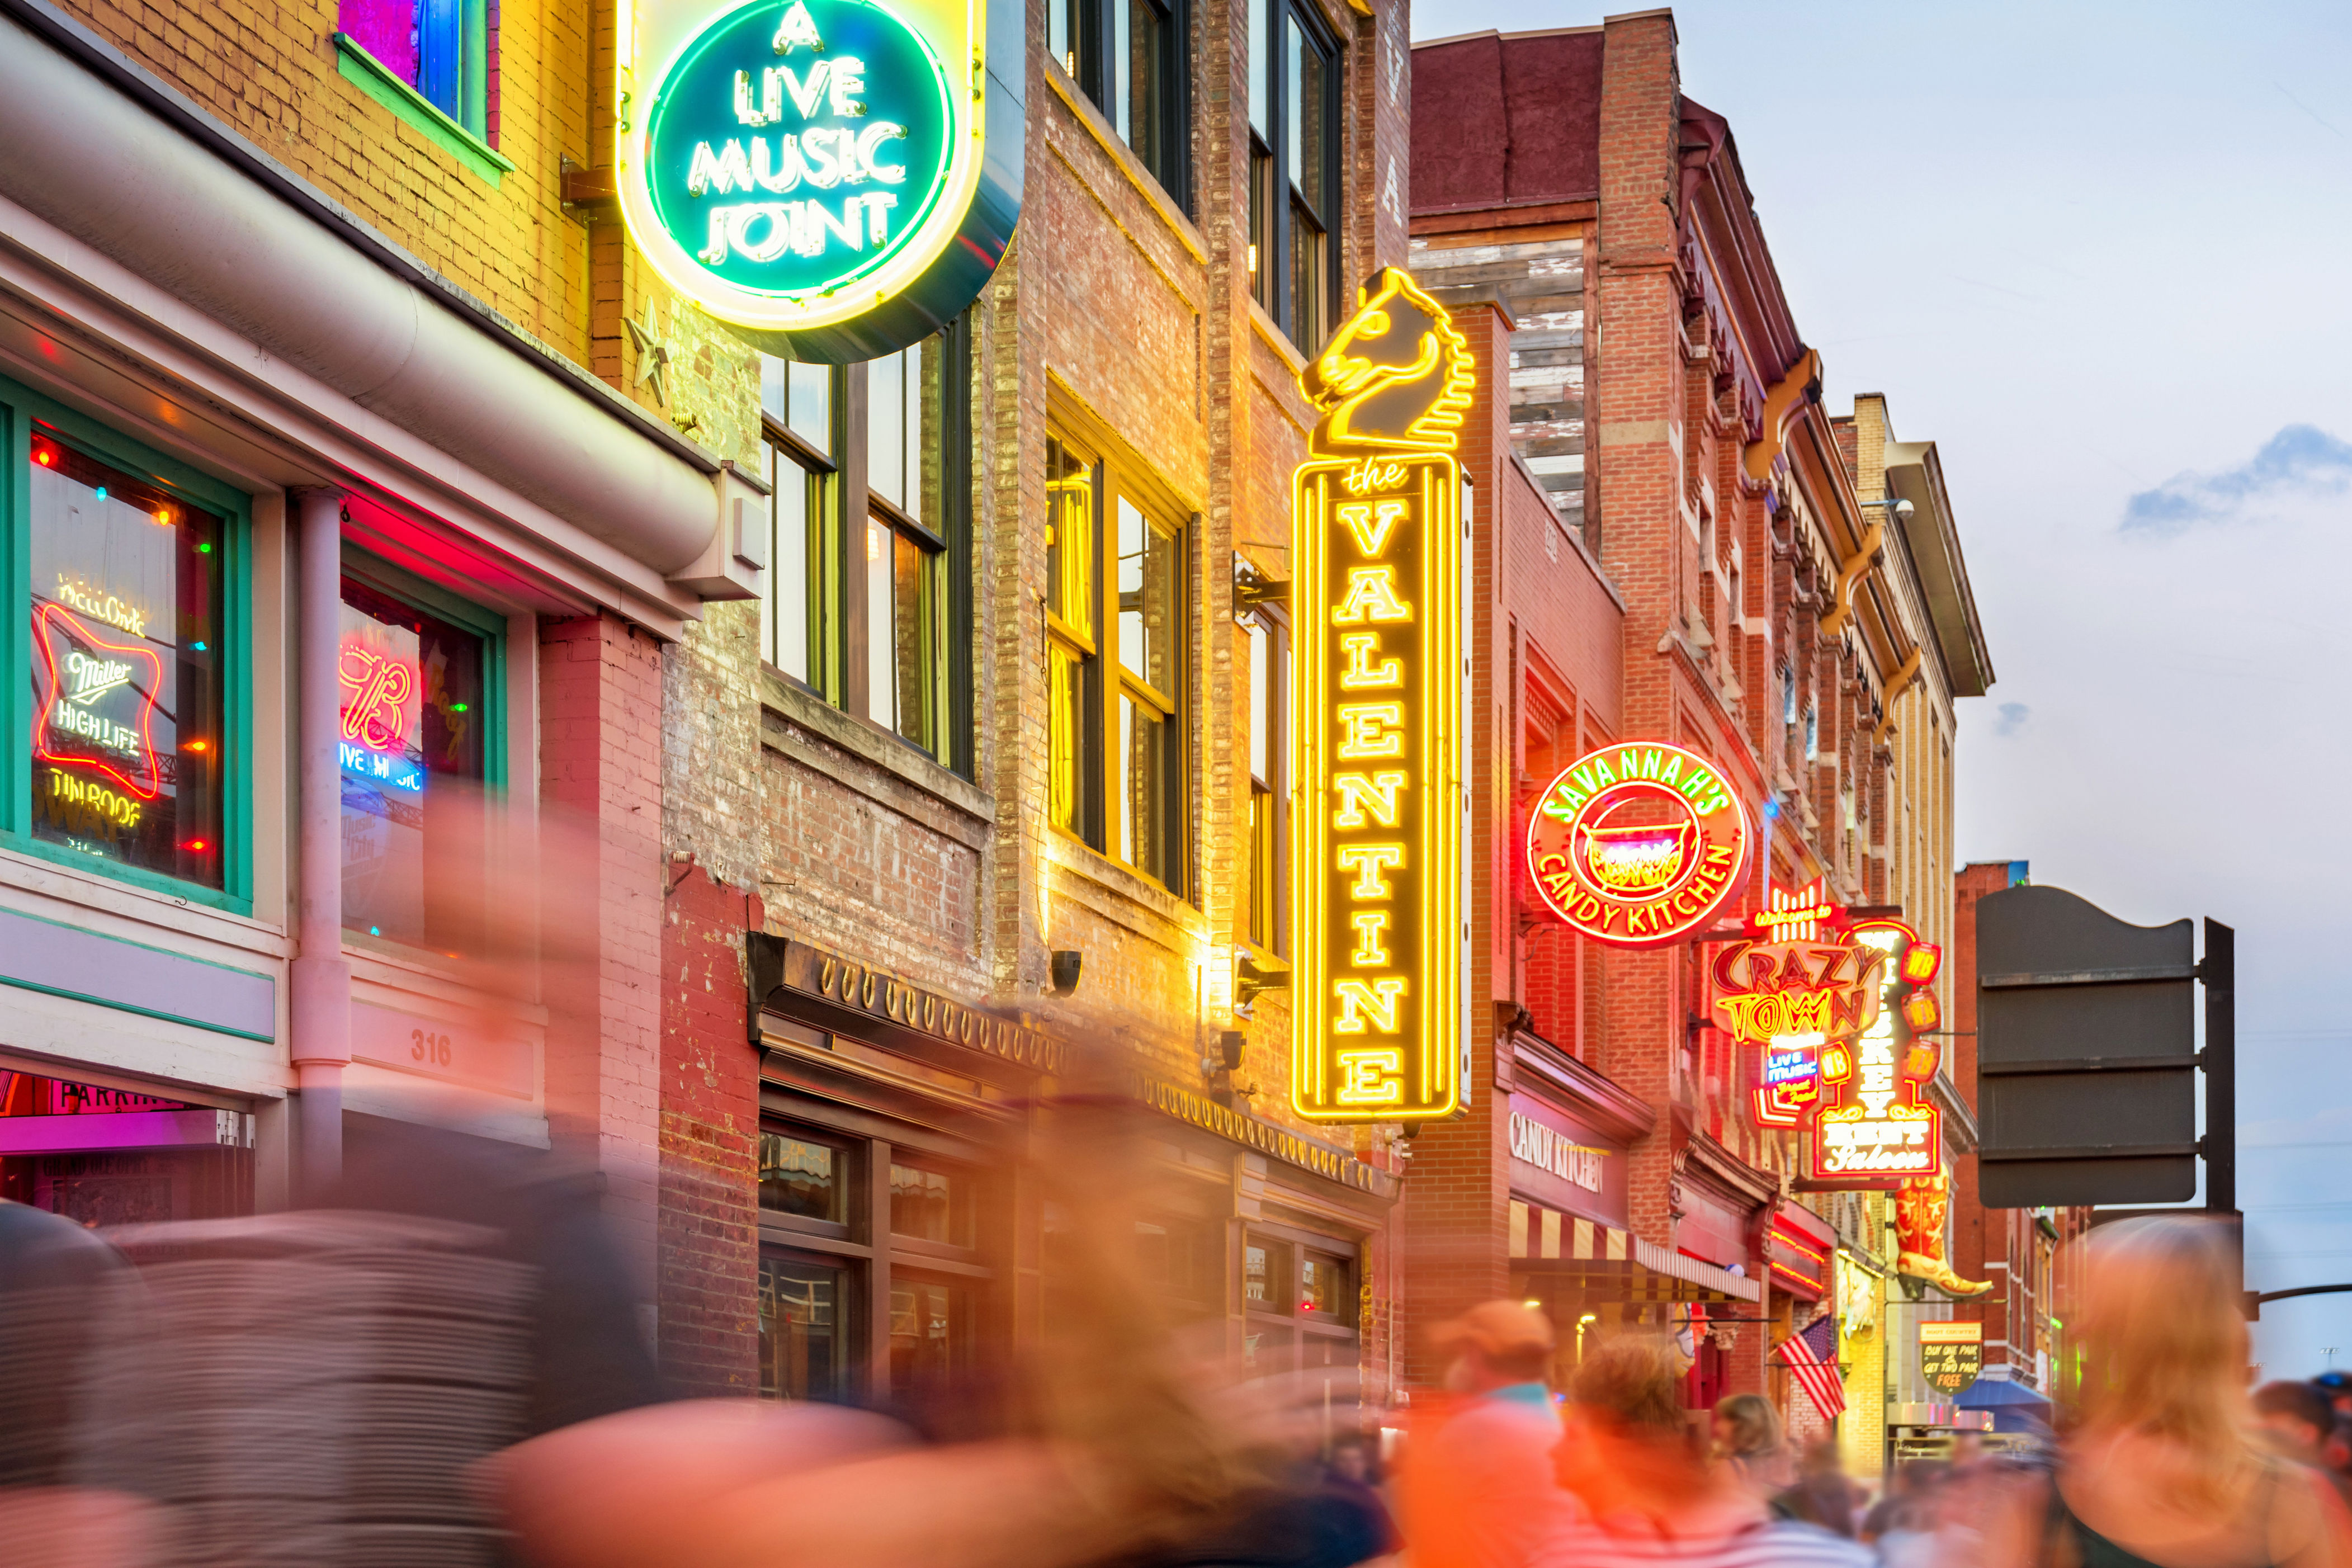 <p>Music is the main focus of this cruise, which begins in Nashville on July 9 with an unforgettable visit to the legendary Grand Ole Opry and ends in Memphis, where passengers will enjoy live music on Beale Street and a tour of Elvis Presley’s <a href="https://www.cntraveler.com/story/on-location-priscilla?mbid=synd_msn_rss&utm_source=msn&utm_medium=syndication">Graceland</a>. On board the <em>American Splendor,</em> passengers will enjoy spacious cabins and popular rocking chairs. First inaugurated in 2016 and fully redecorated in 2022, this ship offers the nostalgia of a classic paddlewheeler along with the comfort of modern amenities.</p> <p>While in Nashville, explore the Johnny Cash Museum, then walk upstairs to The Patsy Cline Museum. Nightly entertainment spotlights the musical heritage of this region as the world’s newest paddlewheeler journeys along the river. The itinerary also includes Clarksville and Dover in Tennessee plus Paducah in Kentucky. In Paducah, stroll along the riverfront with more than 50 life-sized panoramic murals depicting Paducah’s past. Stop by Paducah’s National Quilt Museum, the world’s largest museum devoted to quilt and fiber art.</p> <div class="callout"><p><a href="https://cna.st/affiliate-link/32ZjHBEcANQ5xBKMajXaCdwjMqV4bT6YB1fpSZLz5Zn7YrSRoPYtqaR73kC8WZKKTmvg6Tsac9Fzs4CdEisBDYPz67J5iSY89AGx7MWWmNBFZWqMQLHYwdFtqTpshwRSwfTdfMqbZ2dvgL6zvozj8kUgh5LdGe8tFvdViDu5apVWWvKVd5KnihshCnuUNpoA79xP5VnrkaGYQZgu" rel="sponsored" title="Book with American Cruise Lines">Book with American Cruise Lines</a></p> </div><p>Sign up to receive the latest news, expert tips, and inspiration on all things travel</p><a href="https://www.cntraveler.com/newsletter/the-daily?sourceCode=msnsend">Inspire Me</a>